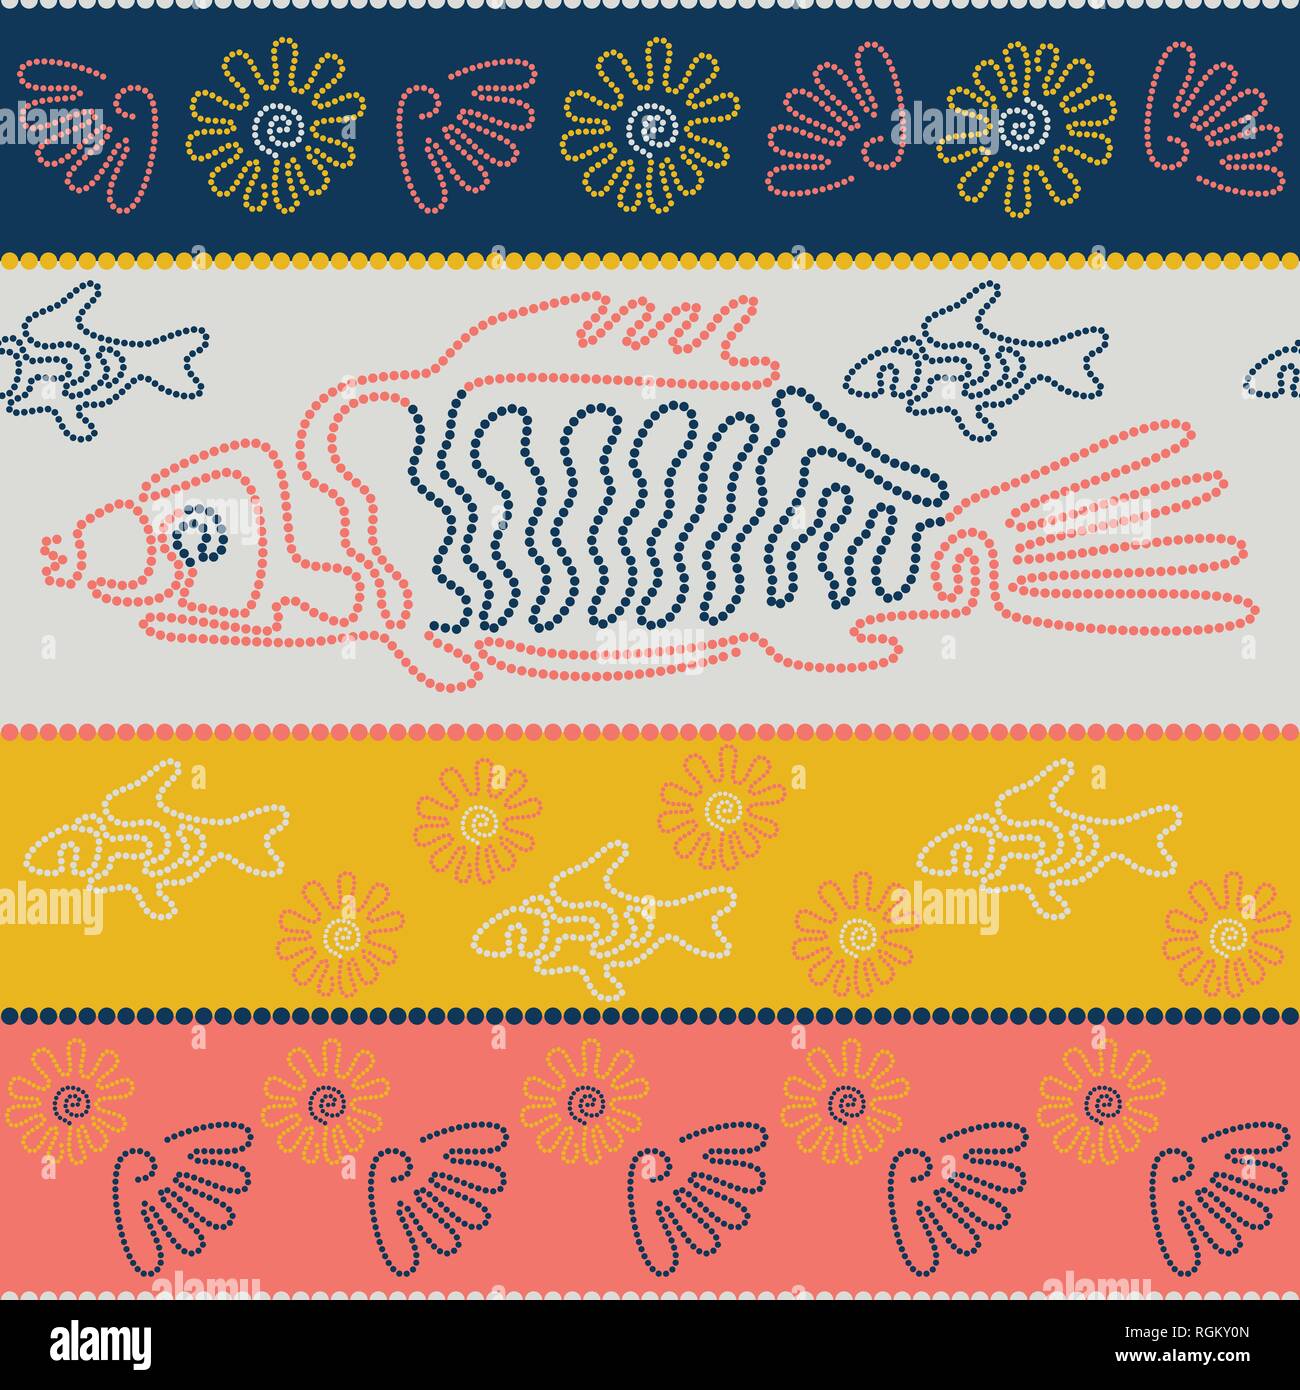 Fish and shells. Point Art. Australian Aboriginal art. Limited color palette. Horizontal stripes. Seamless pattern Stock Vector